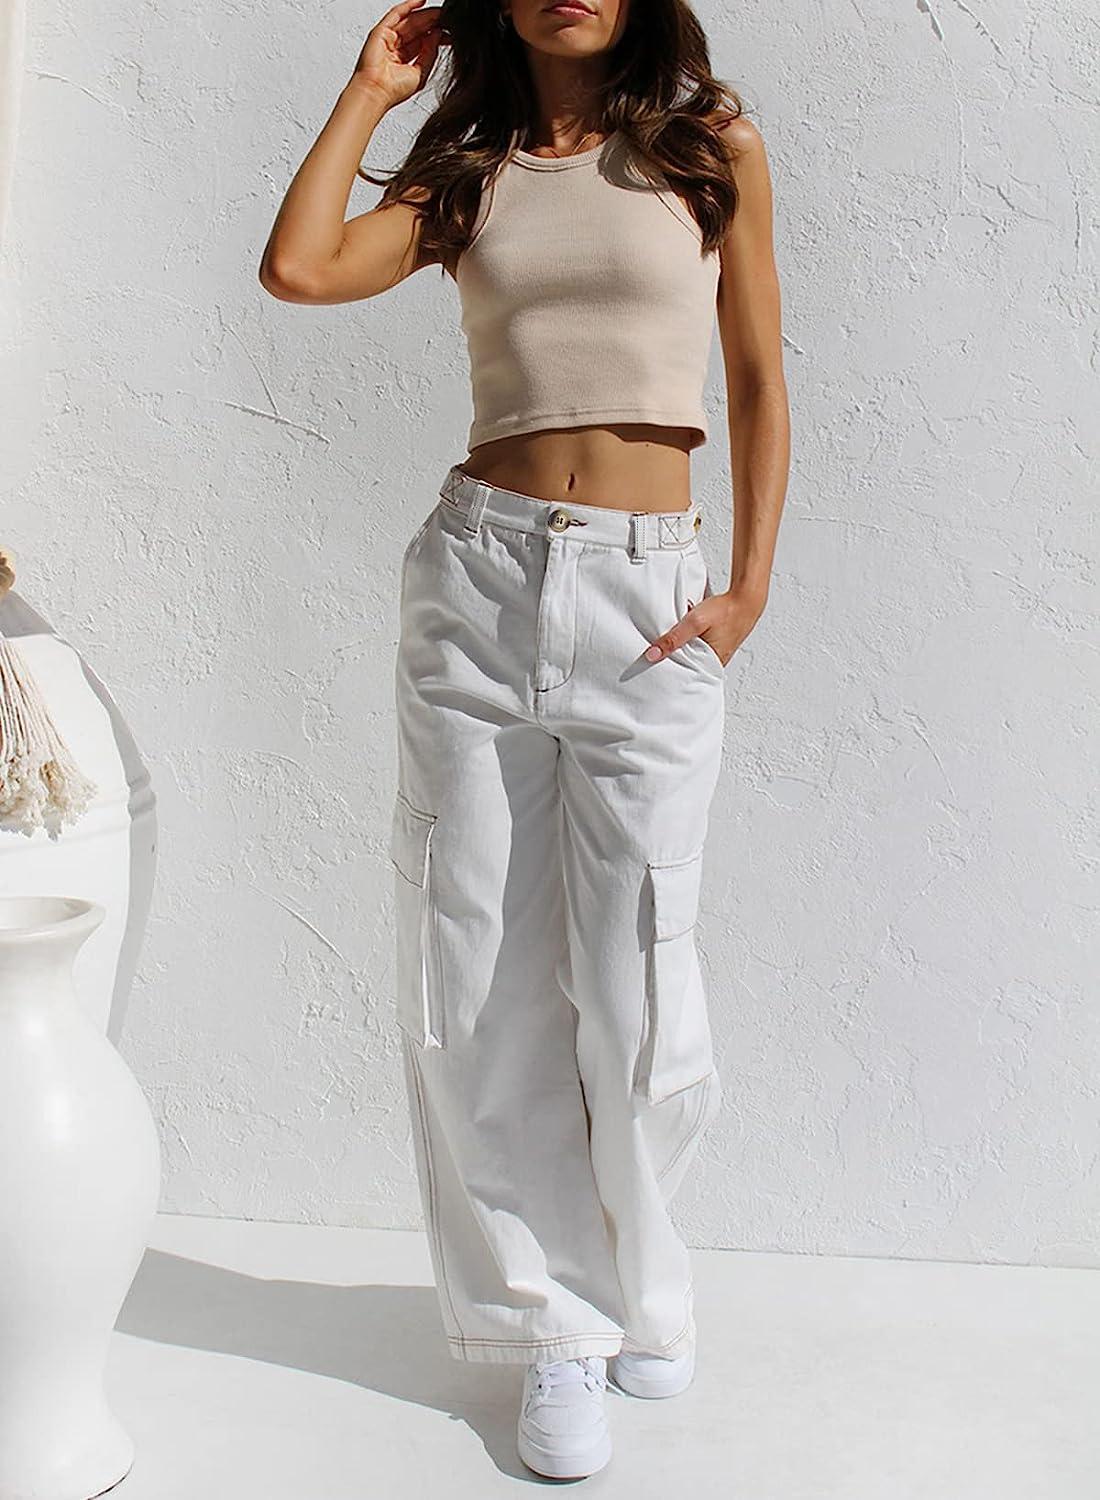 BDG Maya Baggy Trouser Pant | Urban Outfitters Japan - Clothing, Music,  Home & Accessories